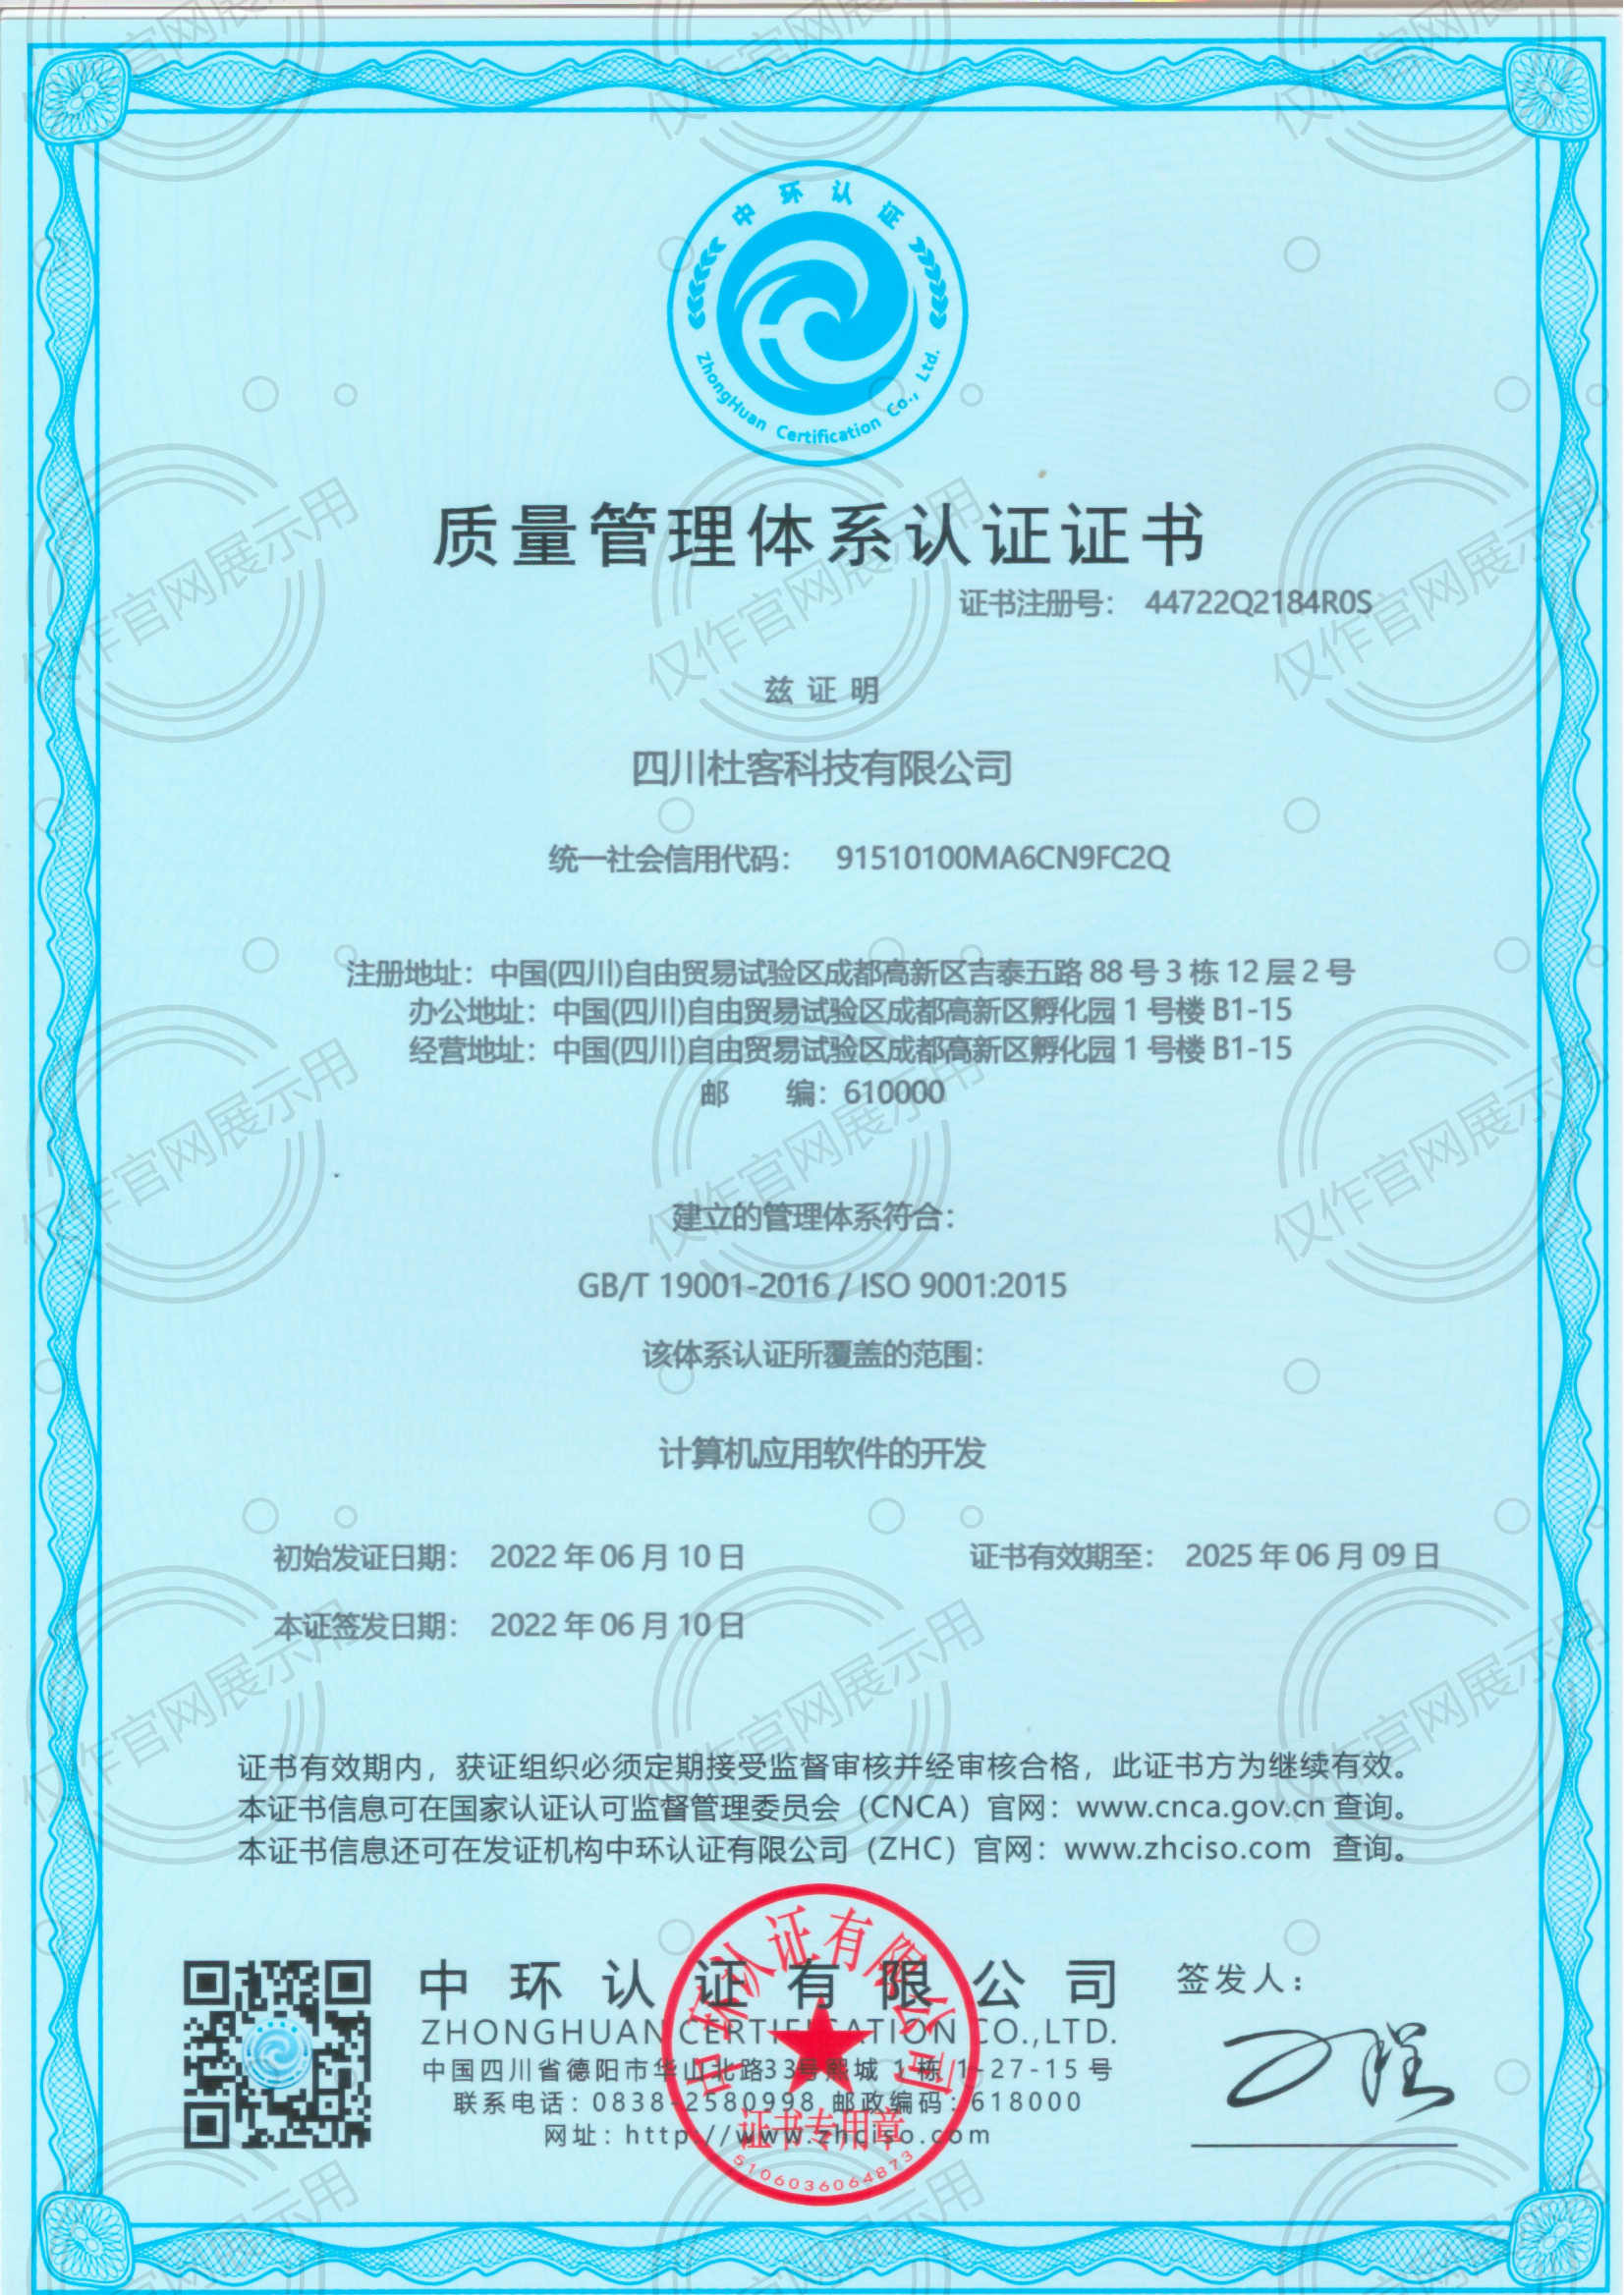 Quality Management System Certification Certificate